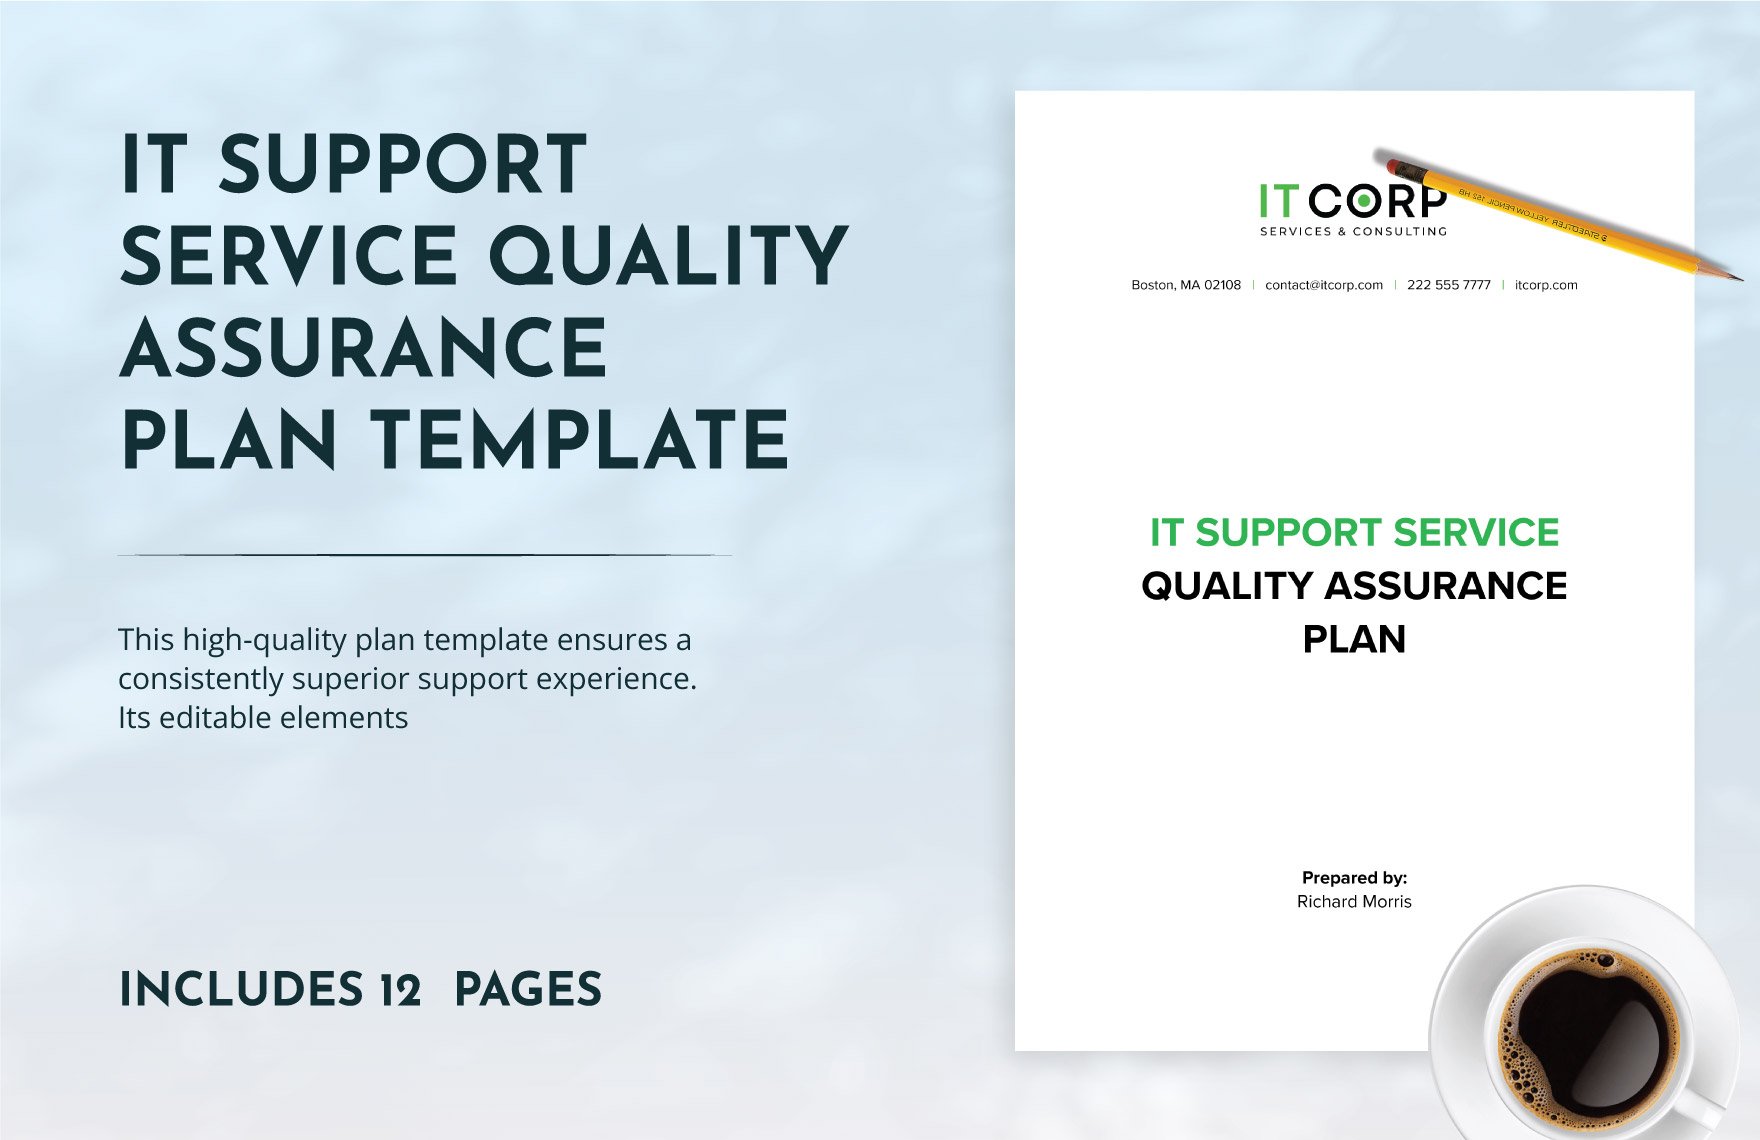 IT Support Service Quality Assurance Plan Template